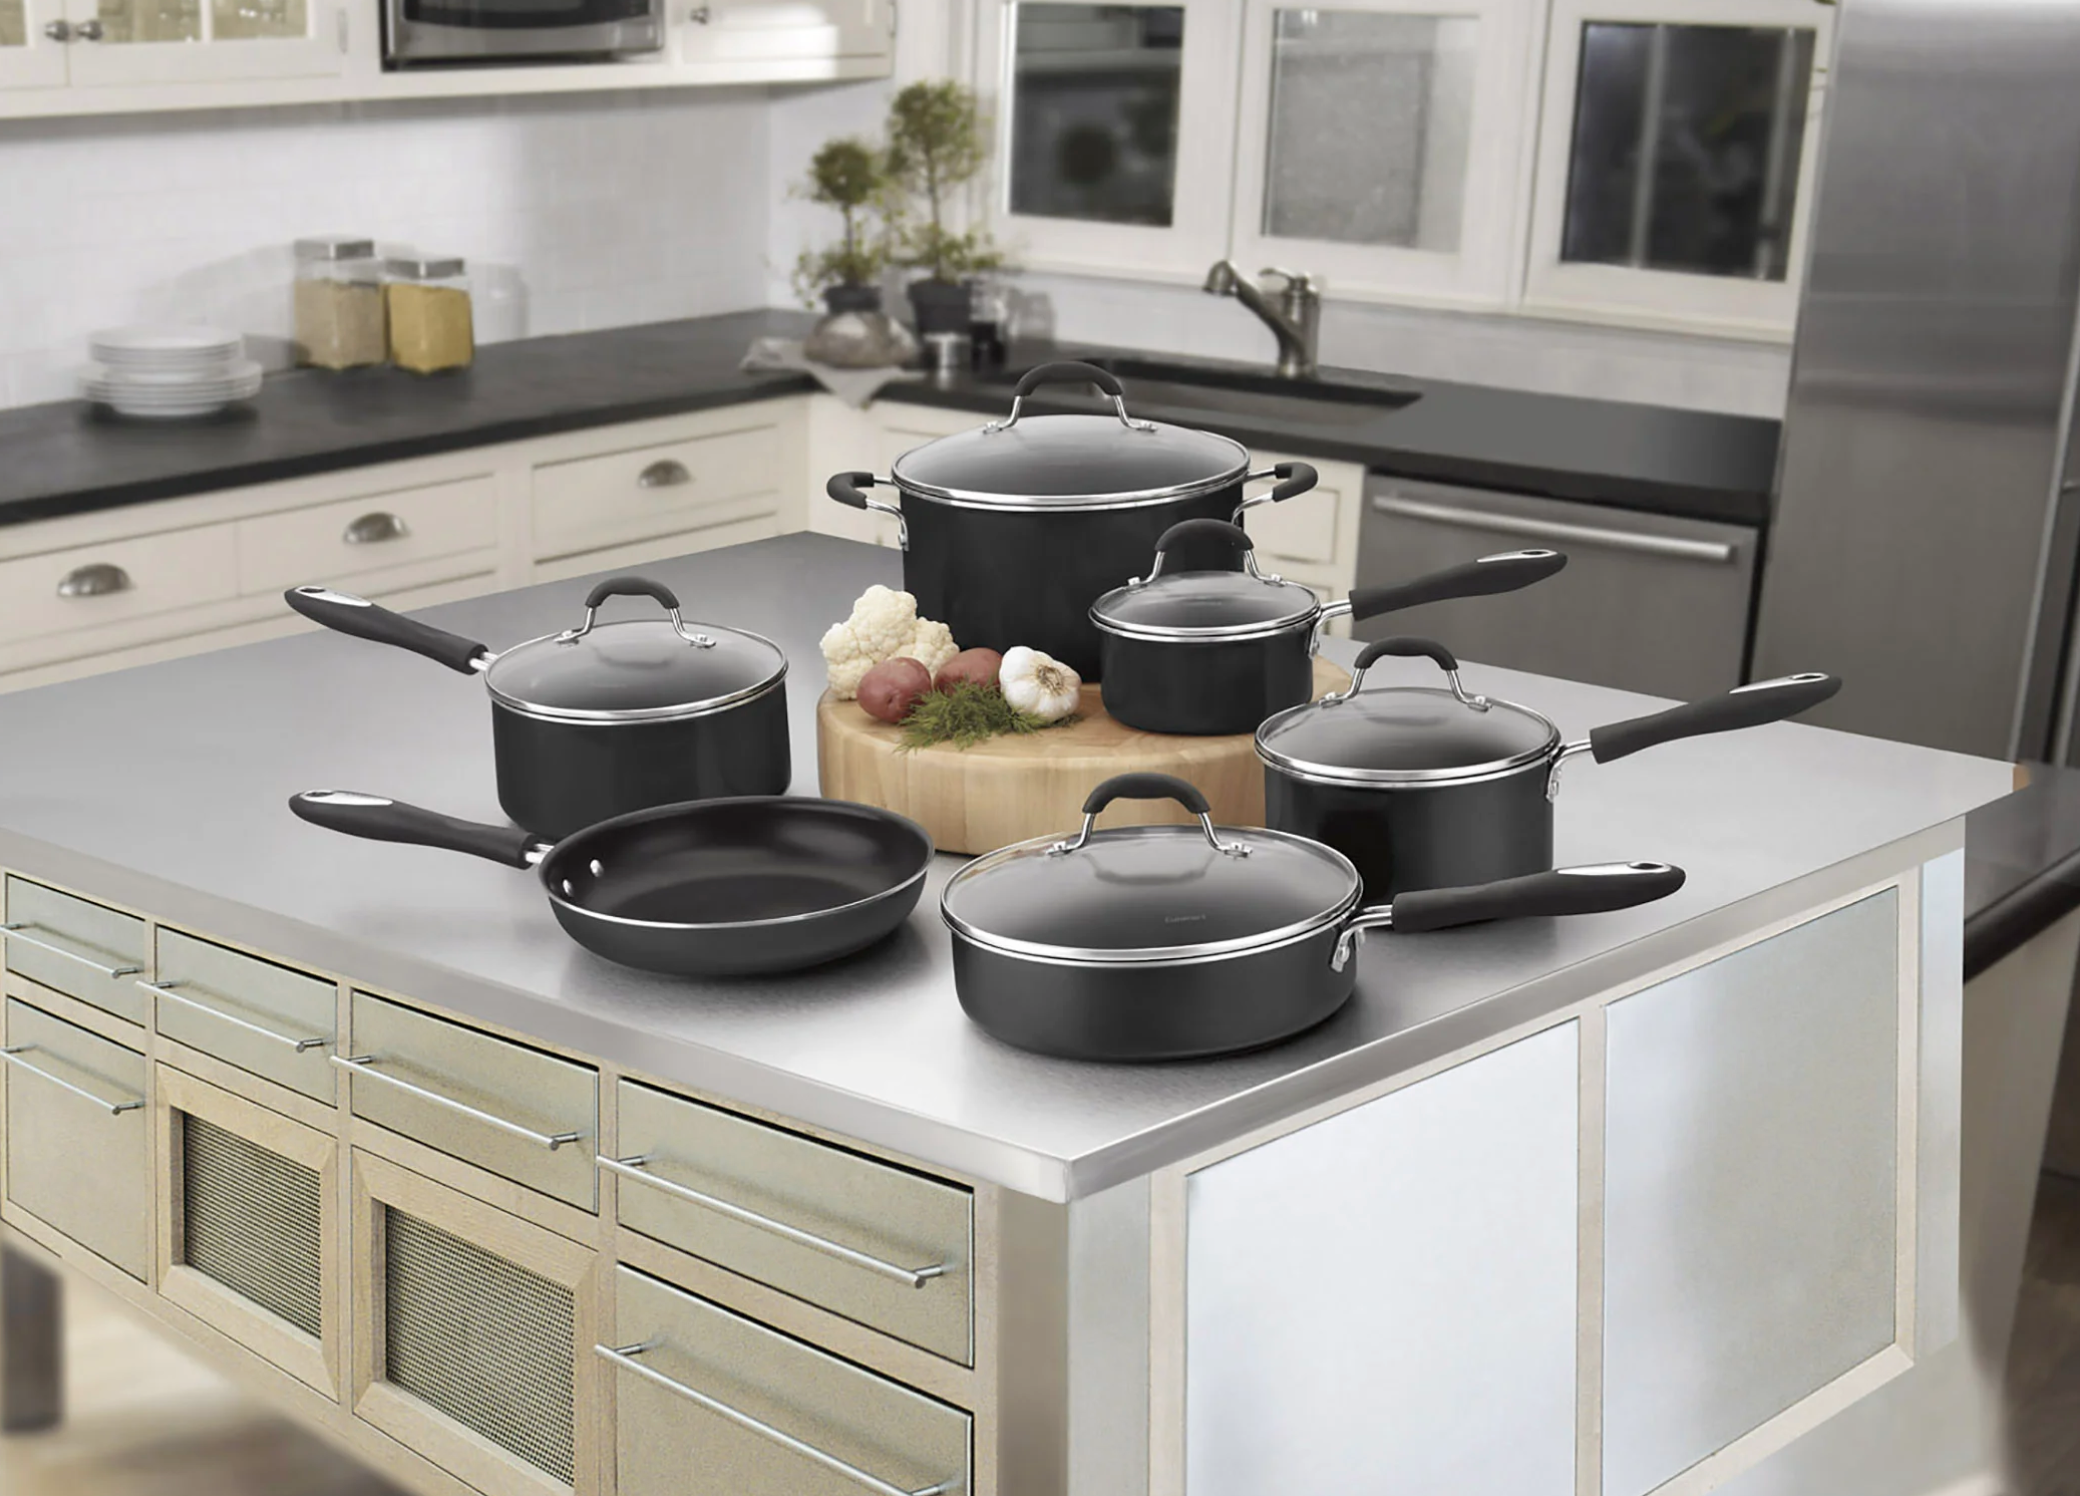 The cookware on a kitchen island in a modern kitchen